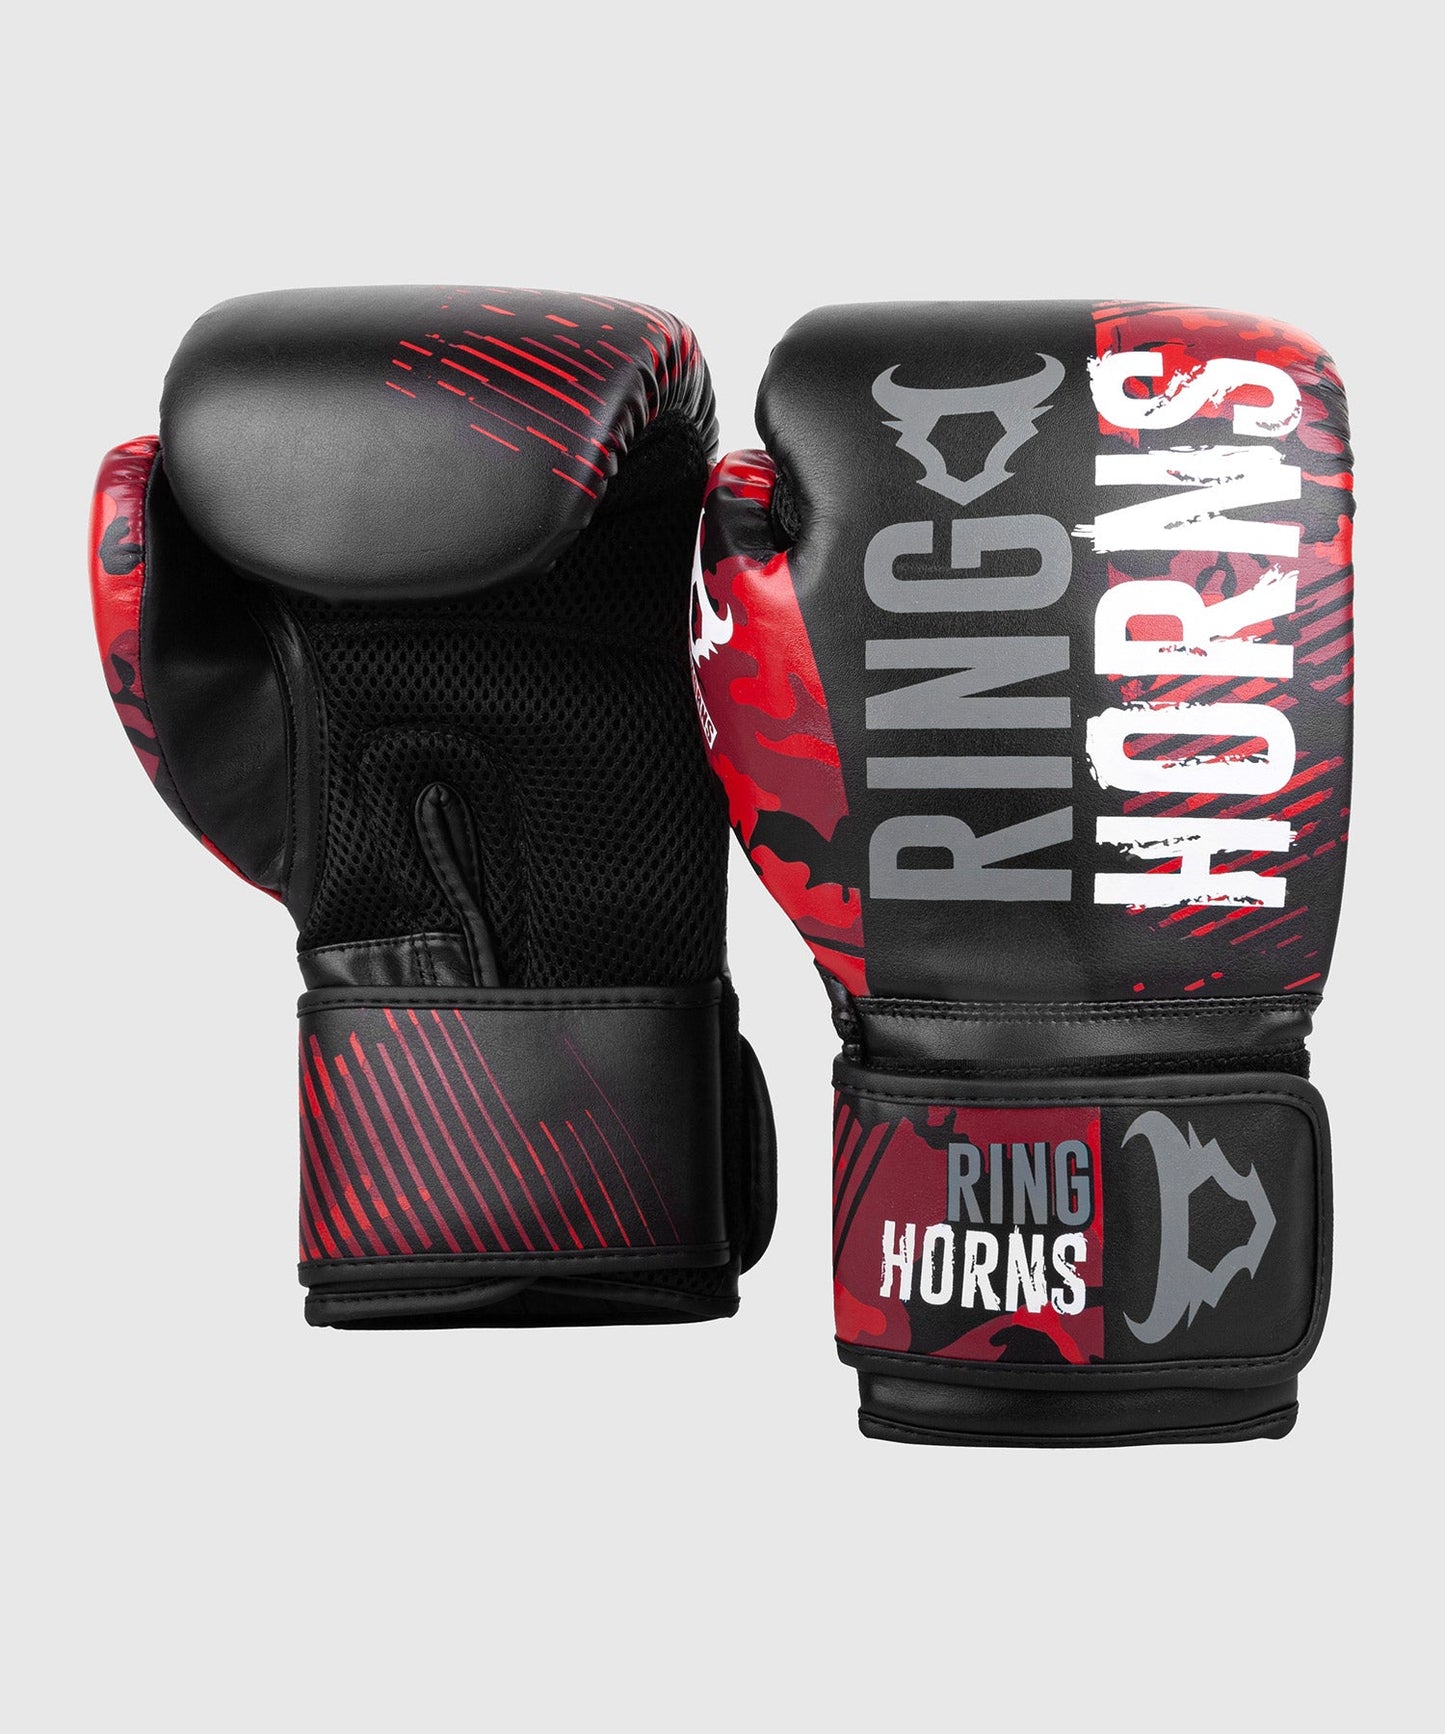 Ringhorns Charger Camo Boxing Gloves - Black/Red